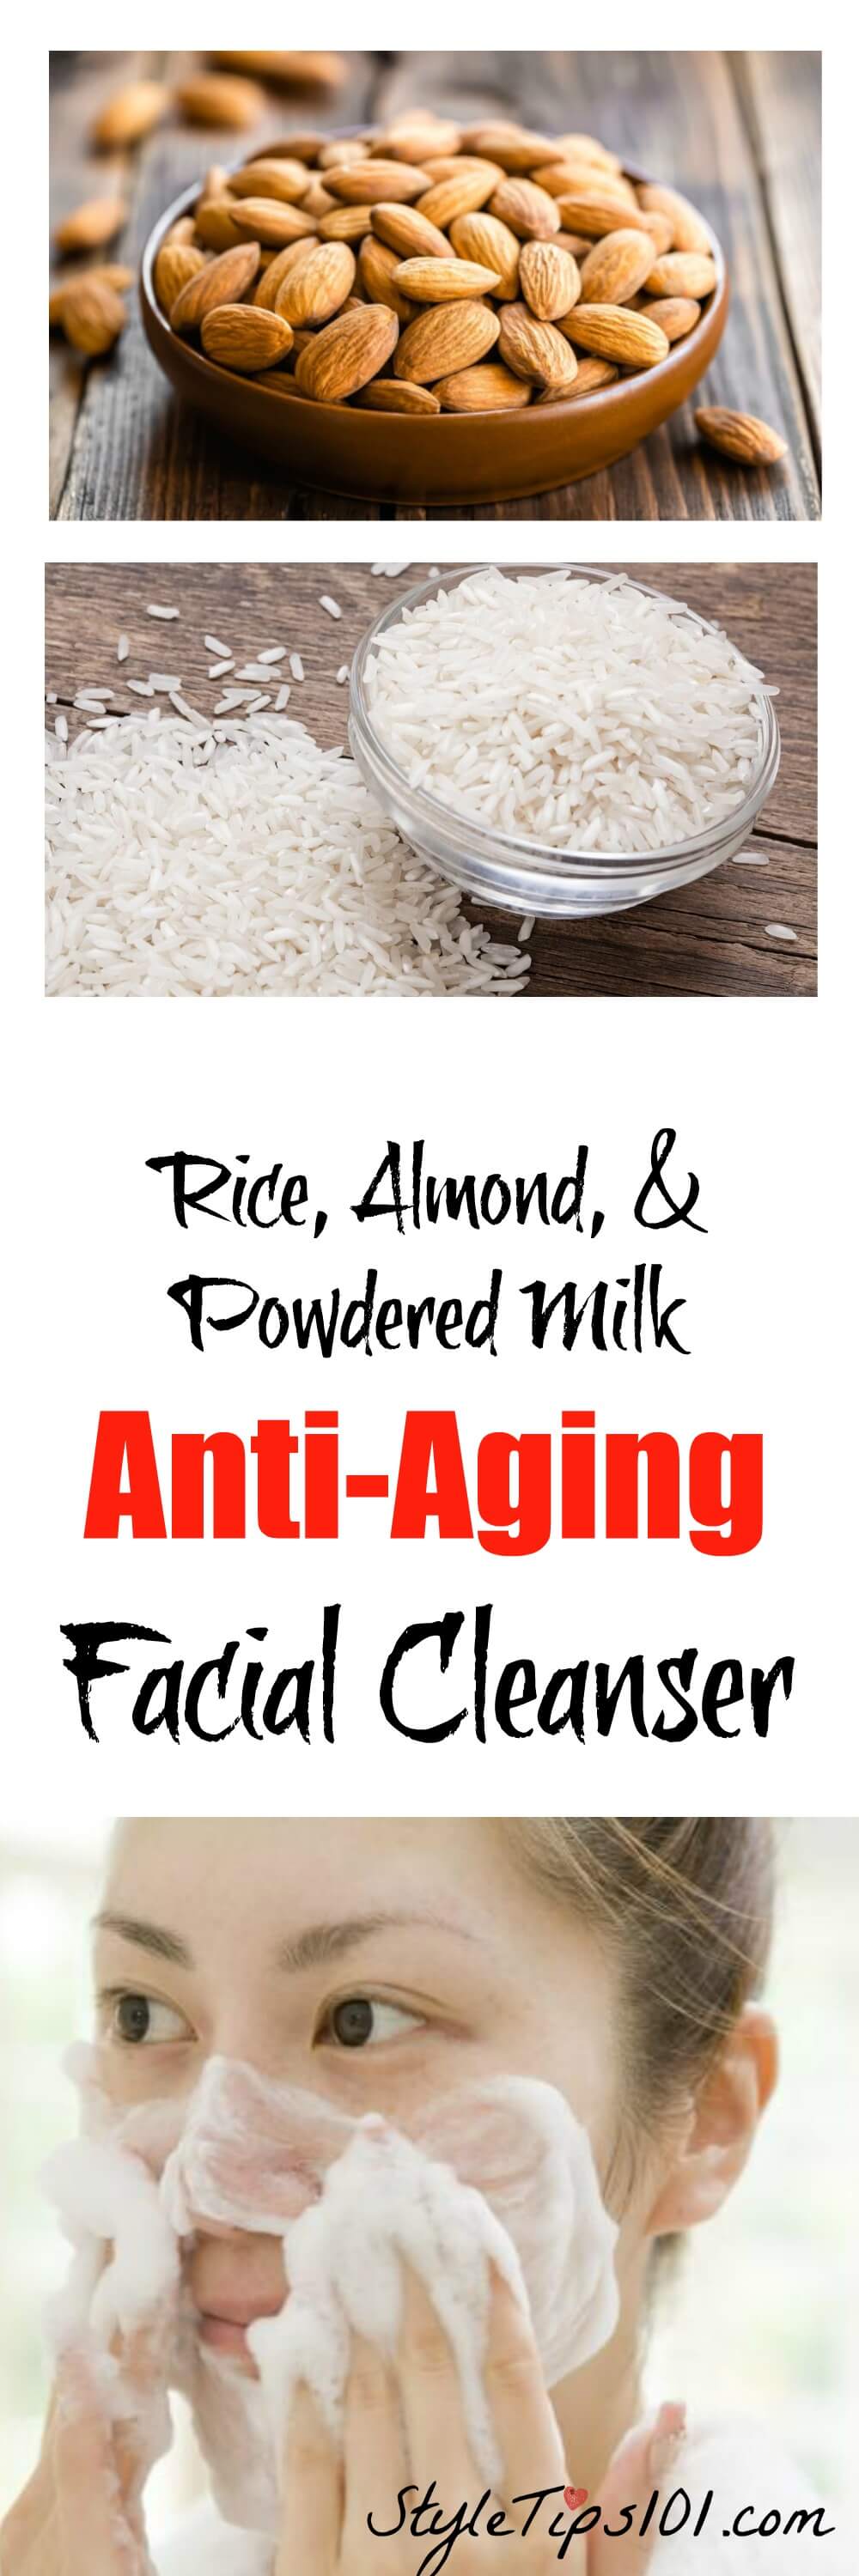 Homemade Anti-Aging Facial Cleanser